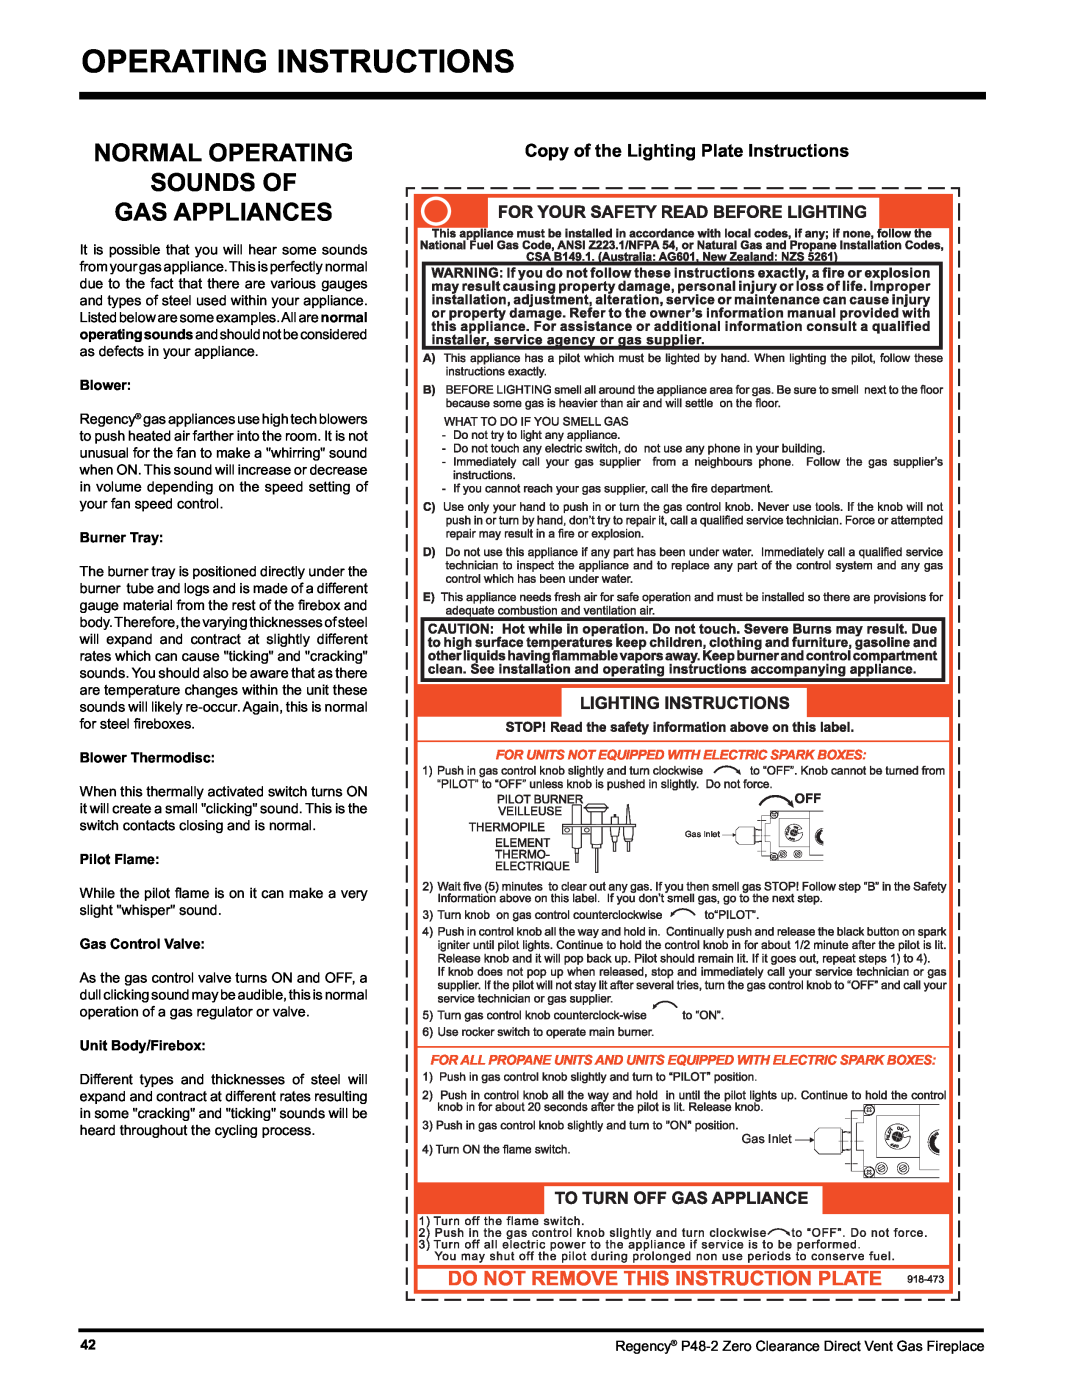 Regency P48-2 Operating Instructions, Normal Operating Sounds Of Gas Appliances, Copy of the Lighting Plate Instructions 